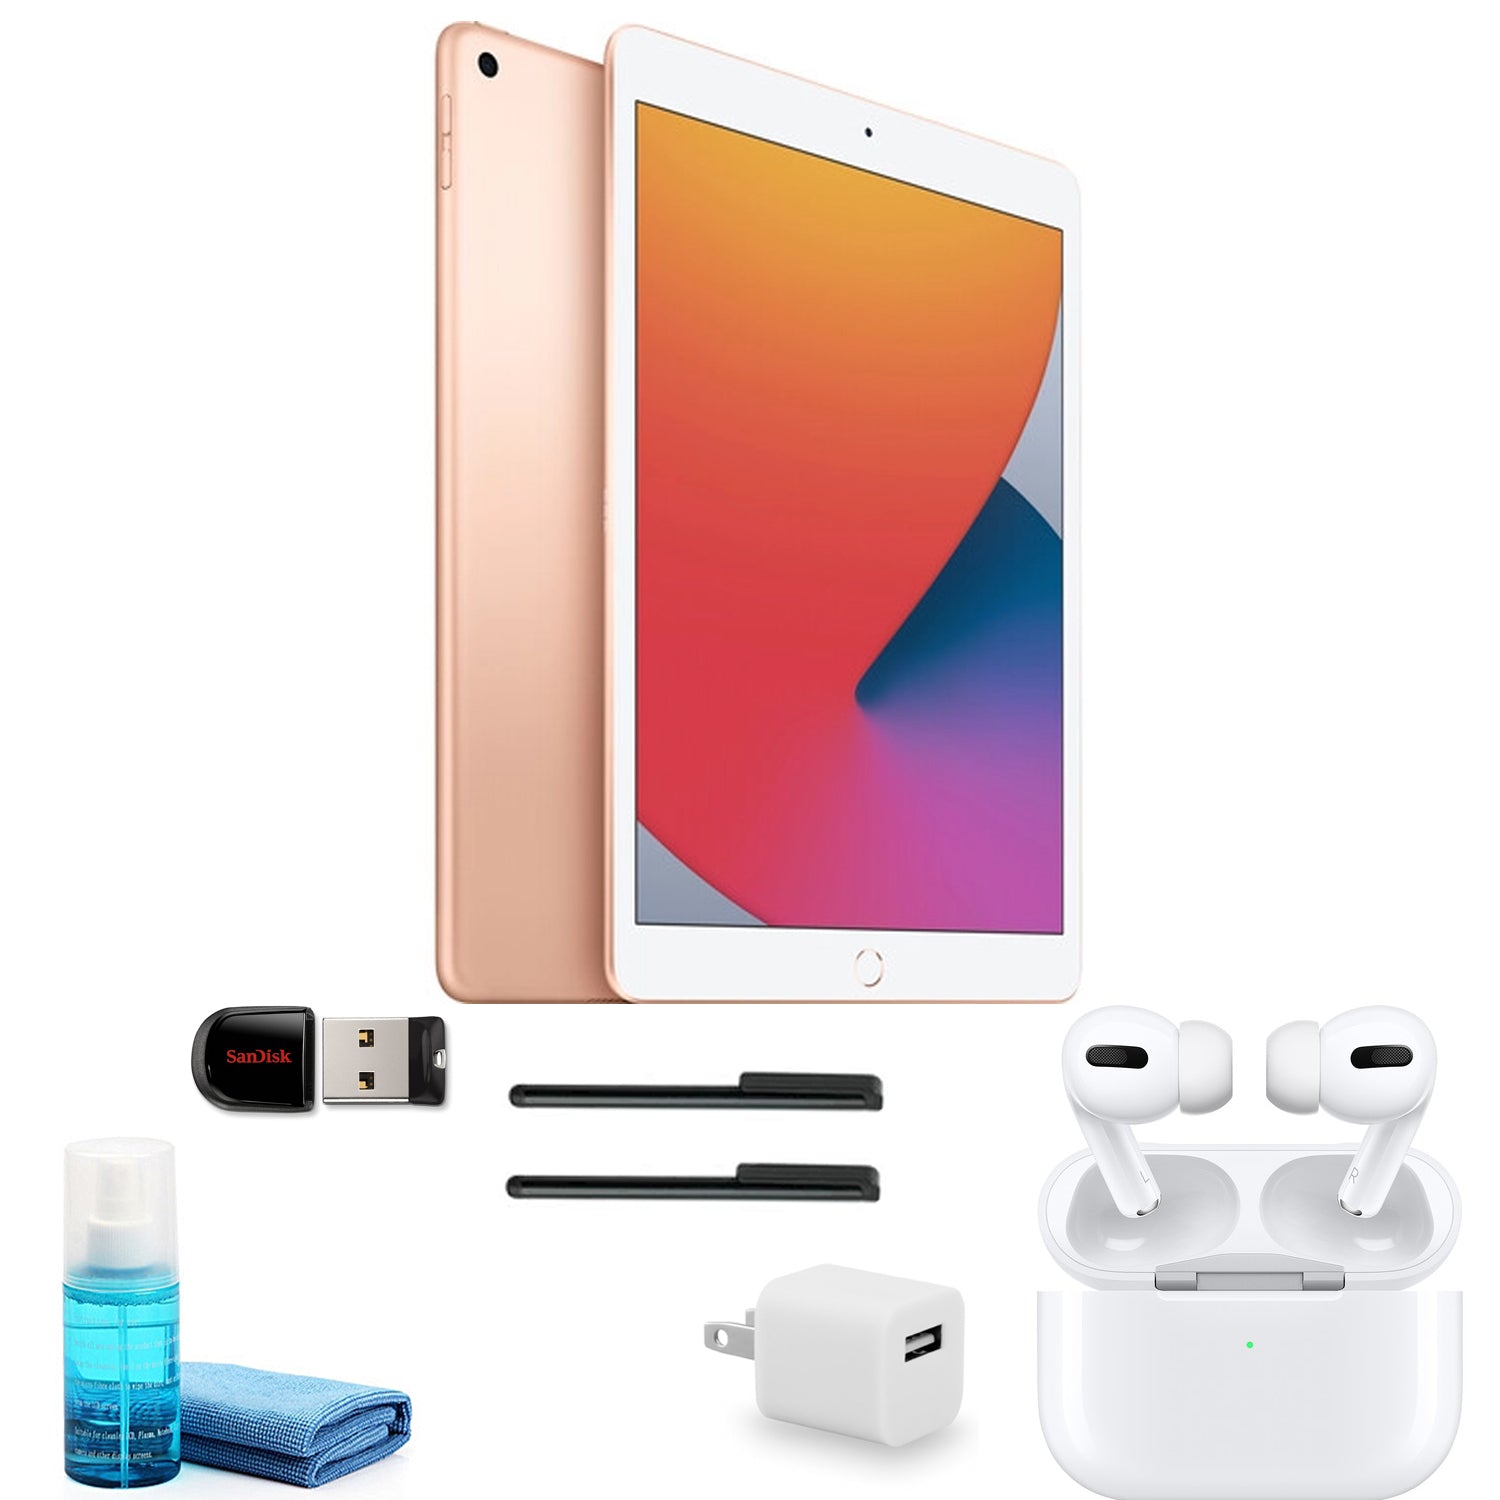 Apple iPad 10.2 Inch (32GB, Gold, MYLC2LL/A) with Apple AirPods Pro and more